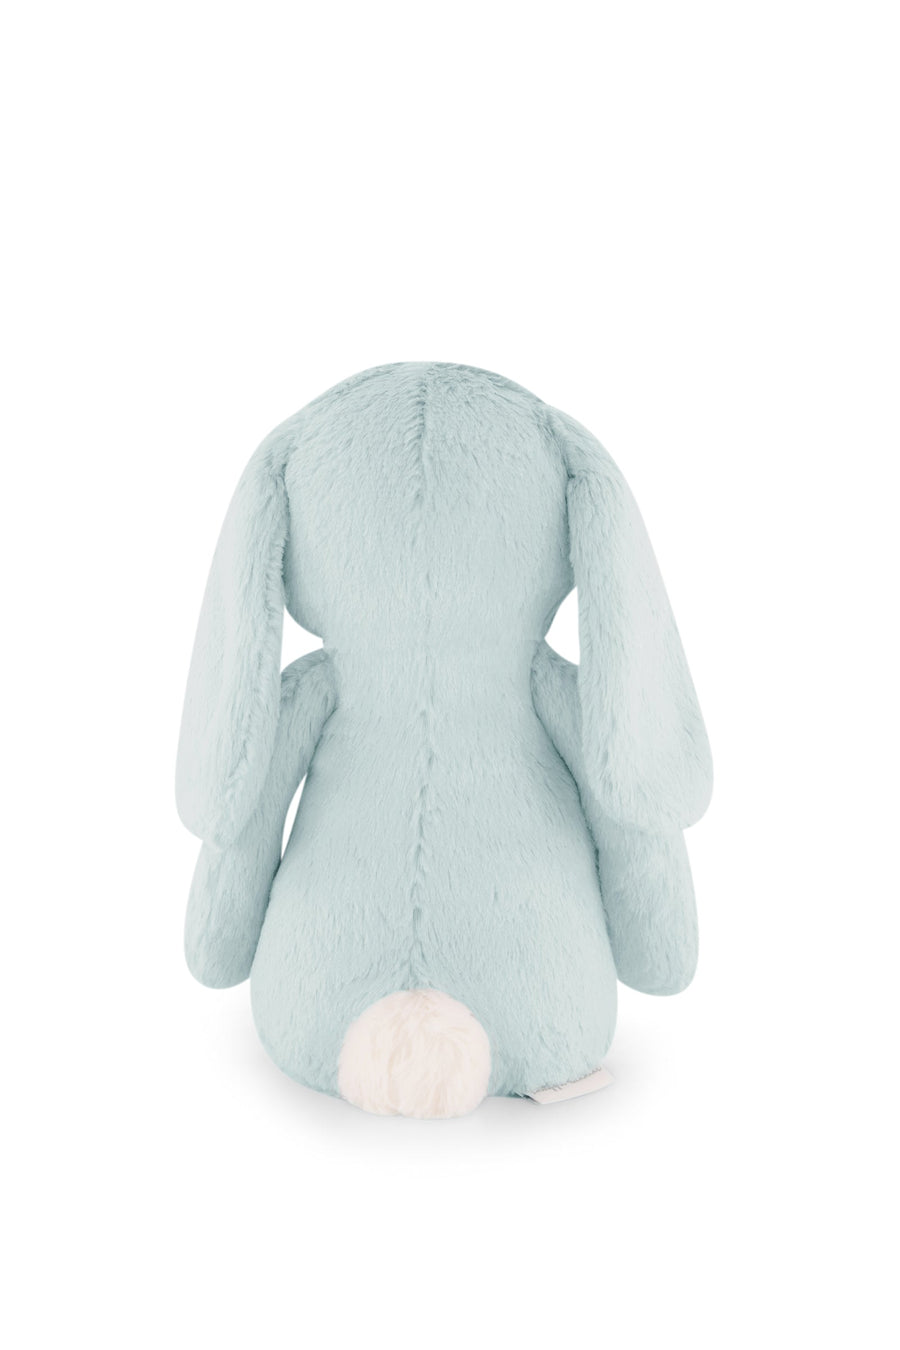 Snuggle Bunnies - Penelope the Bunny - Sprout Childrens Toy from Jamie Kay USA